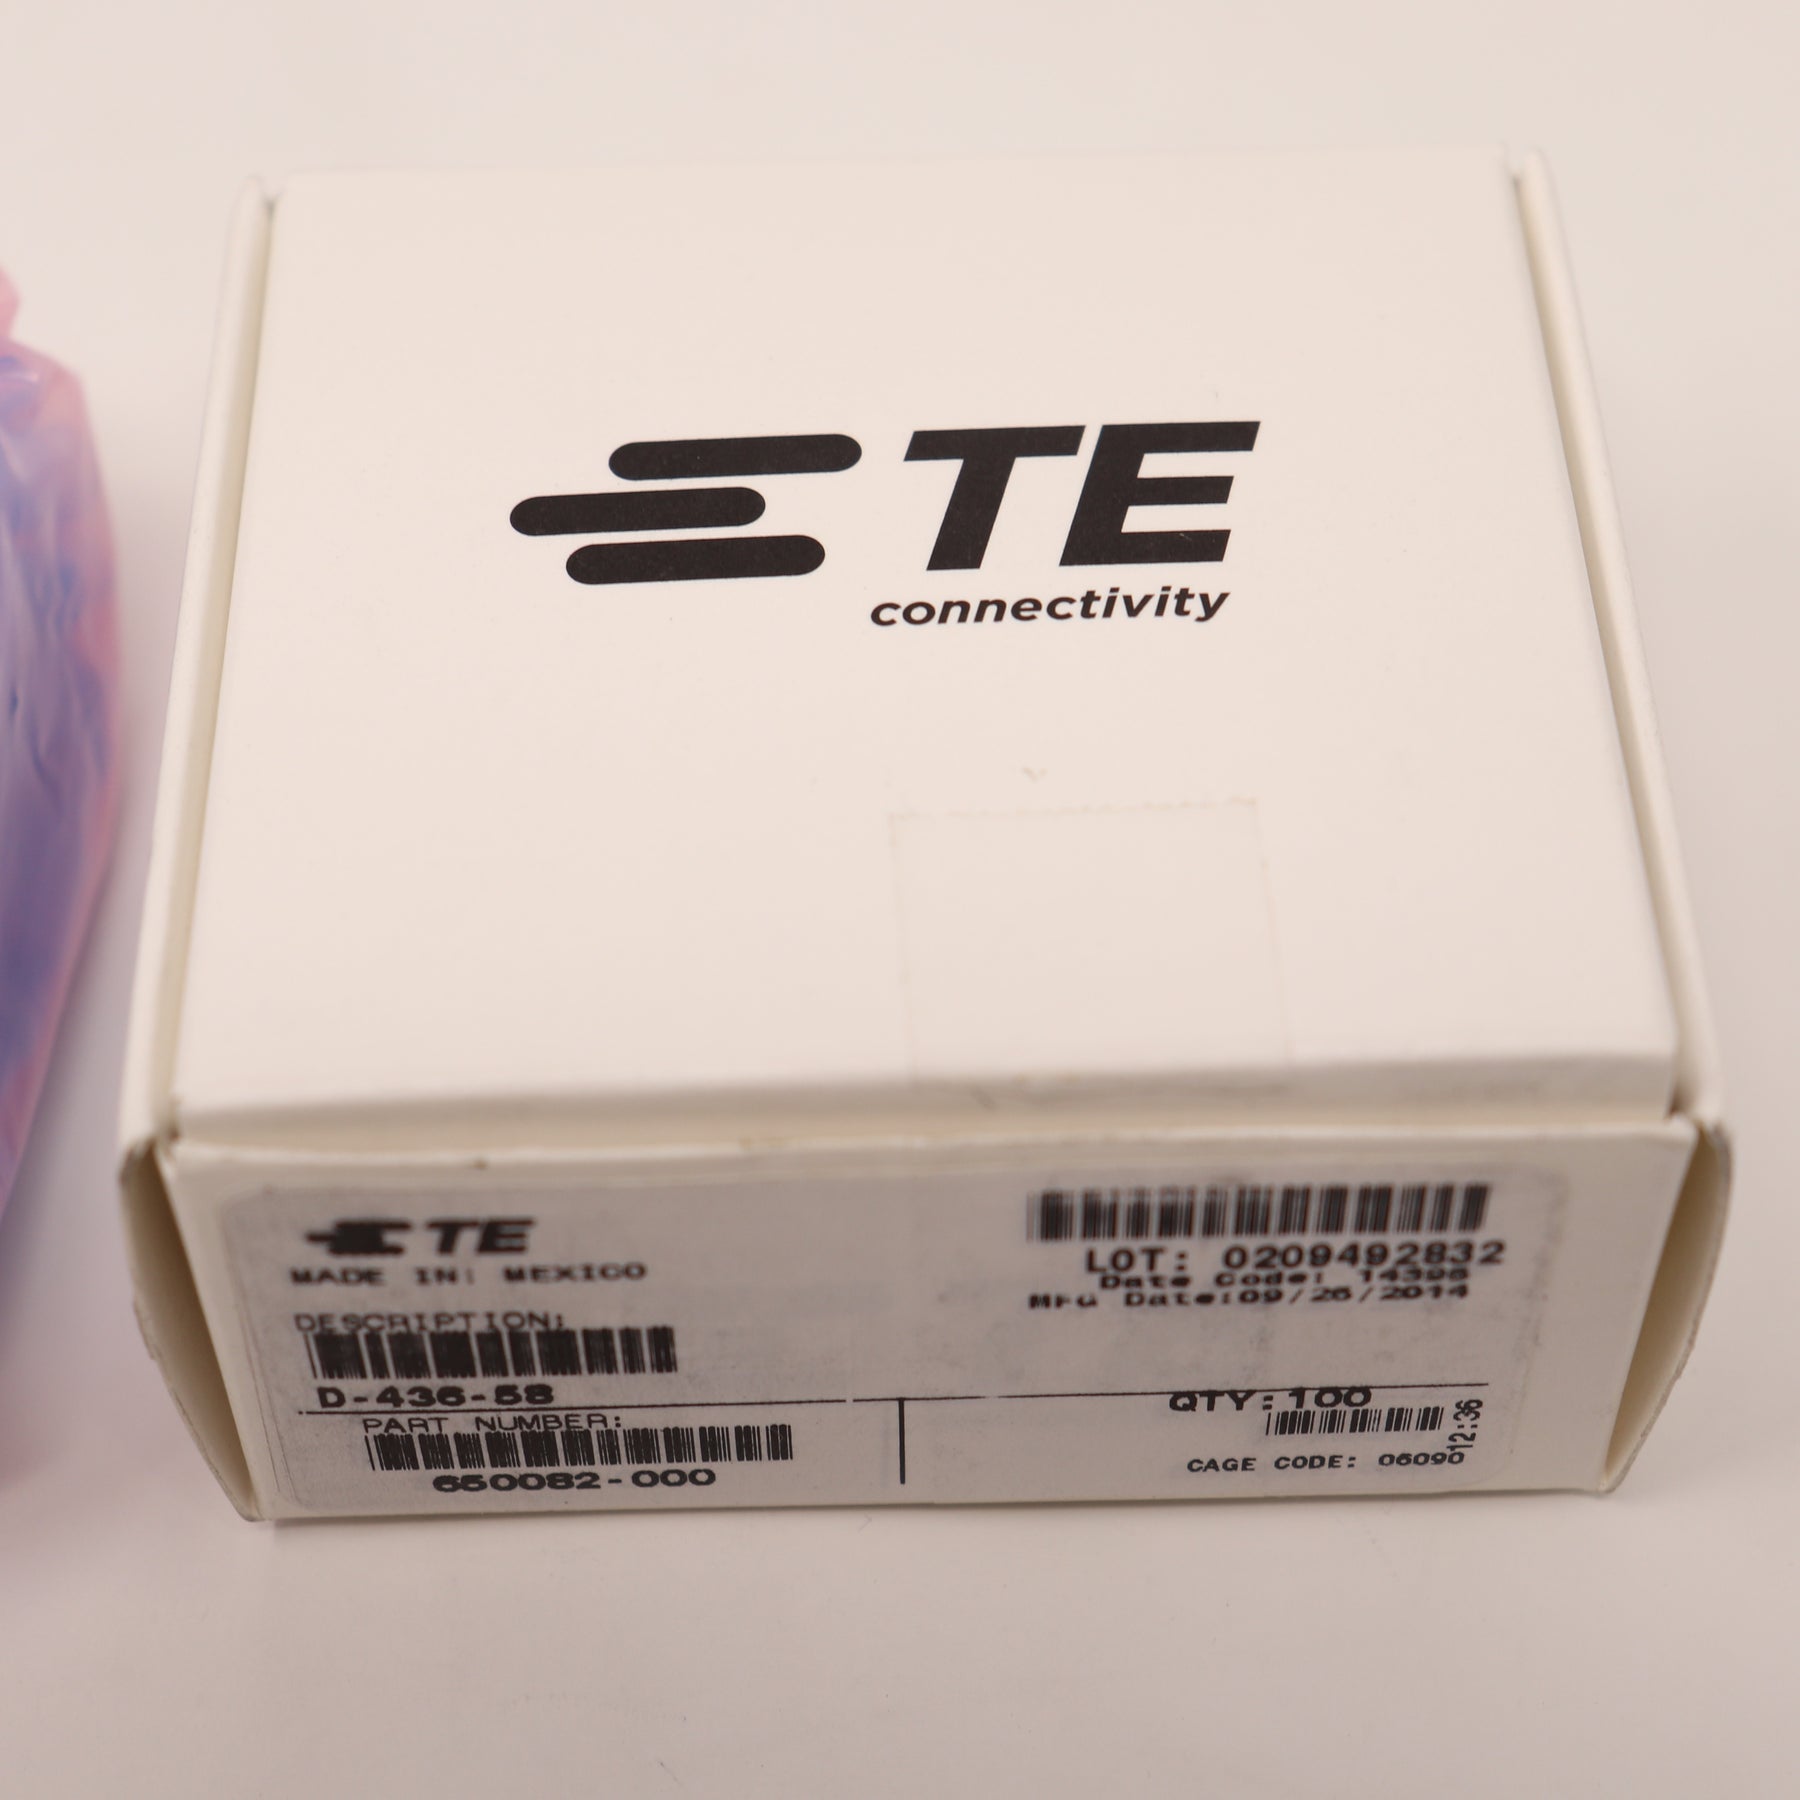 (100) Pack TE Connectivity 20awg-16awg SPLICE D-436-58